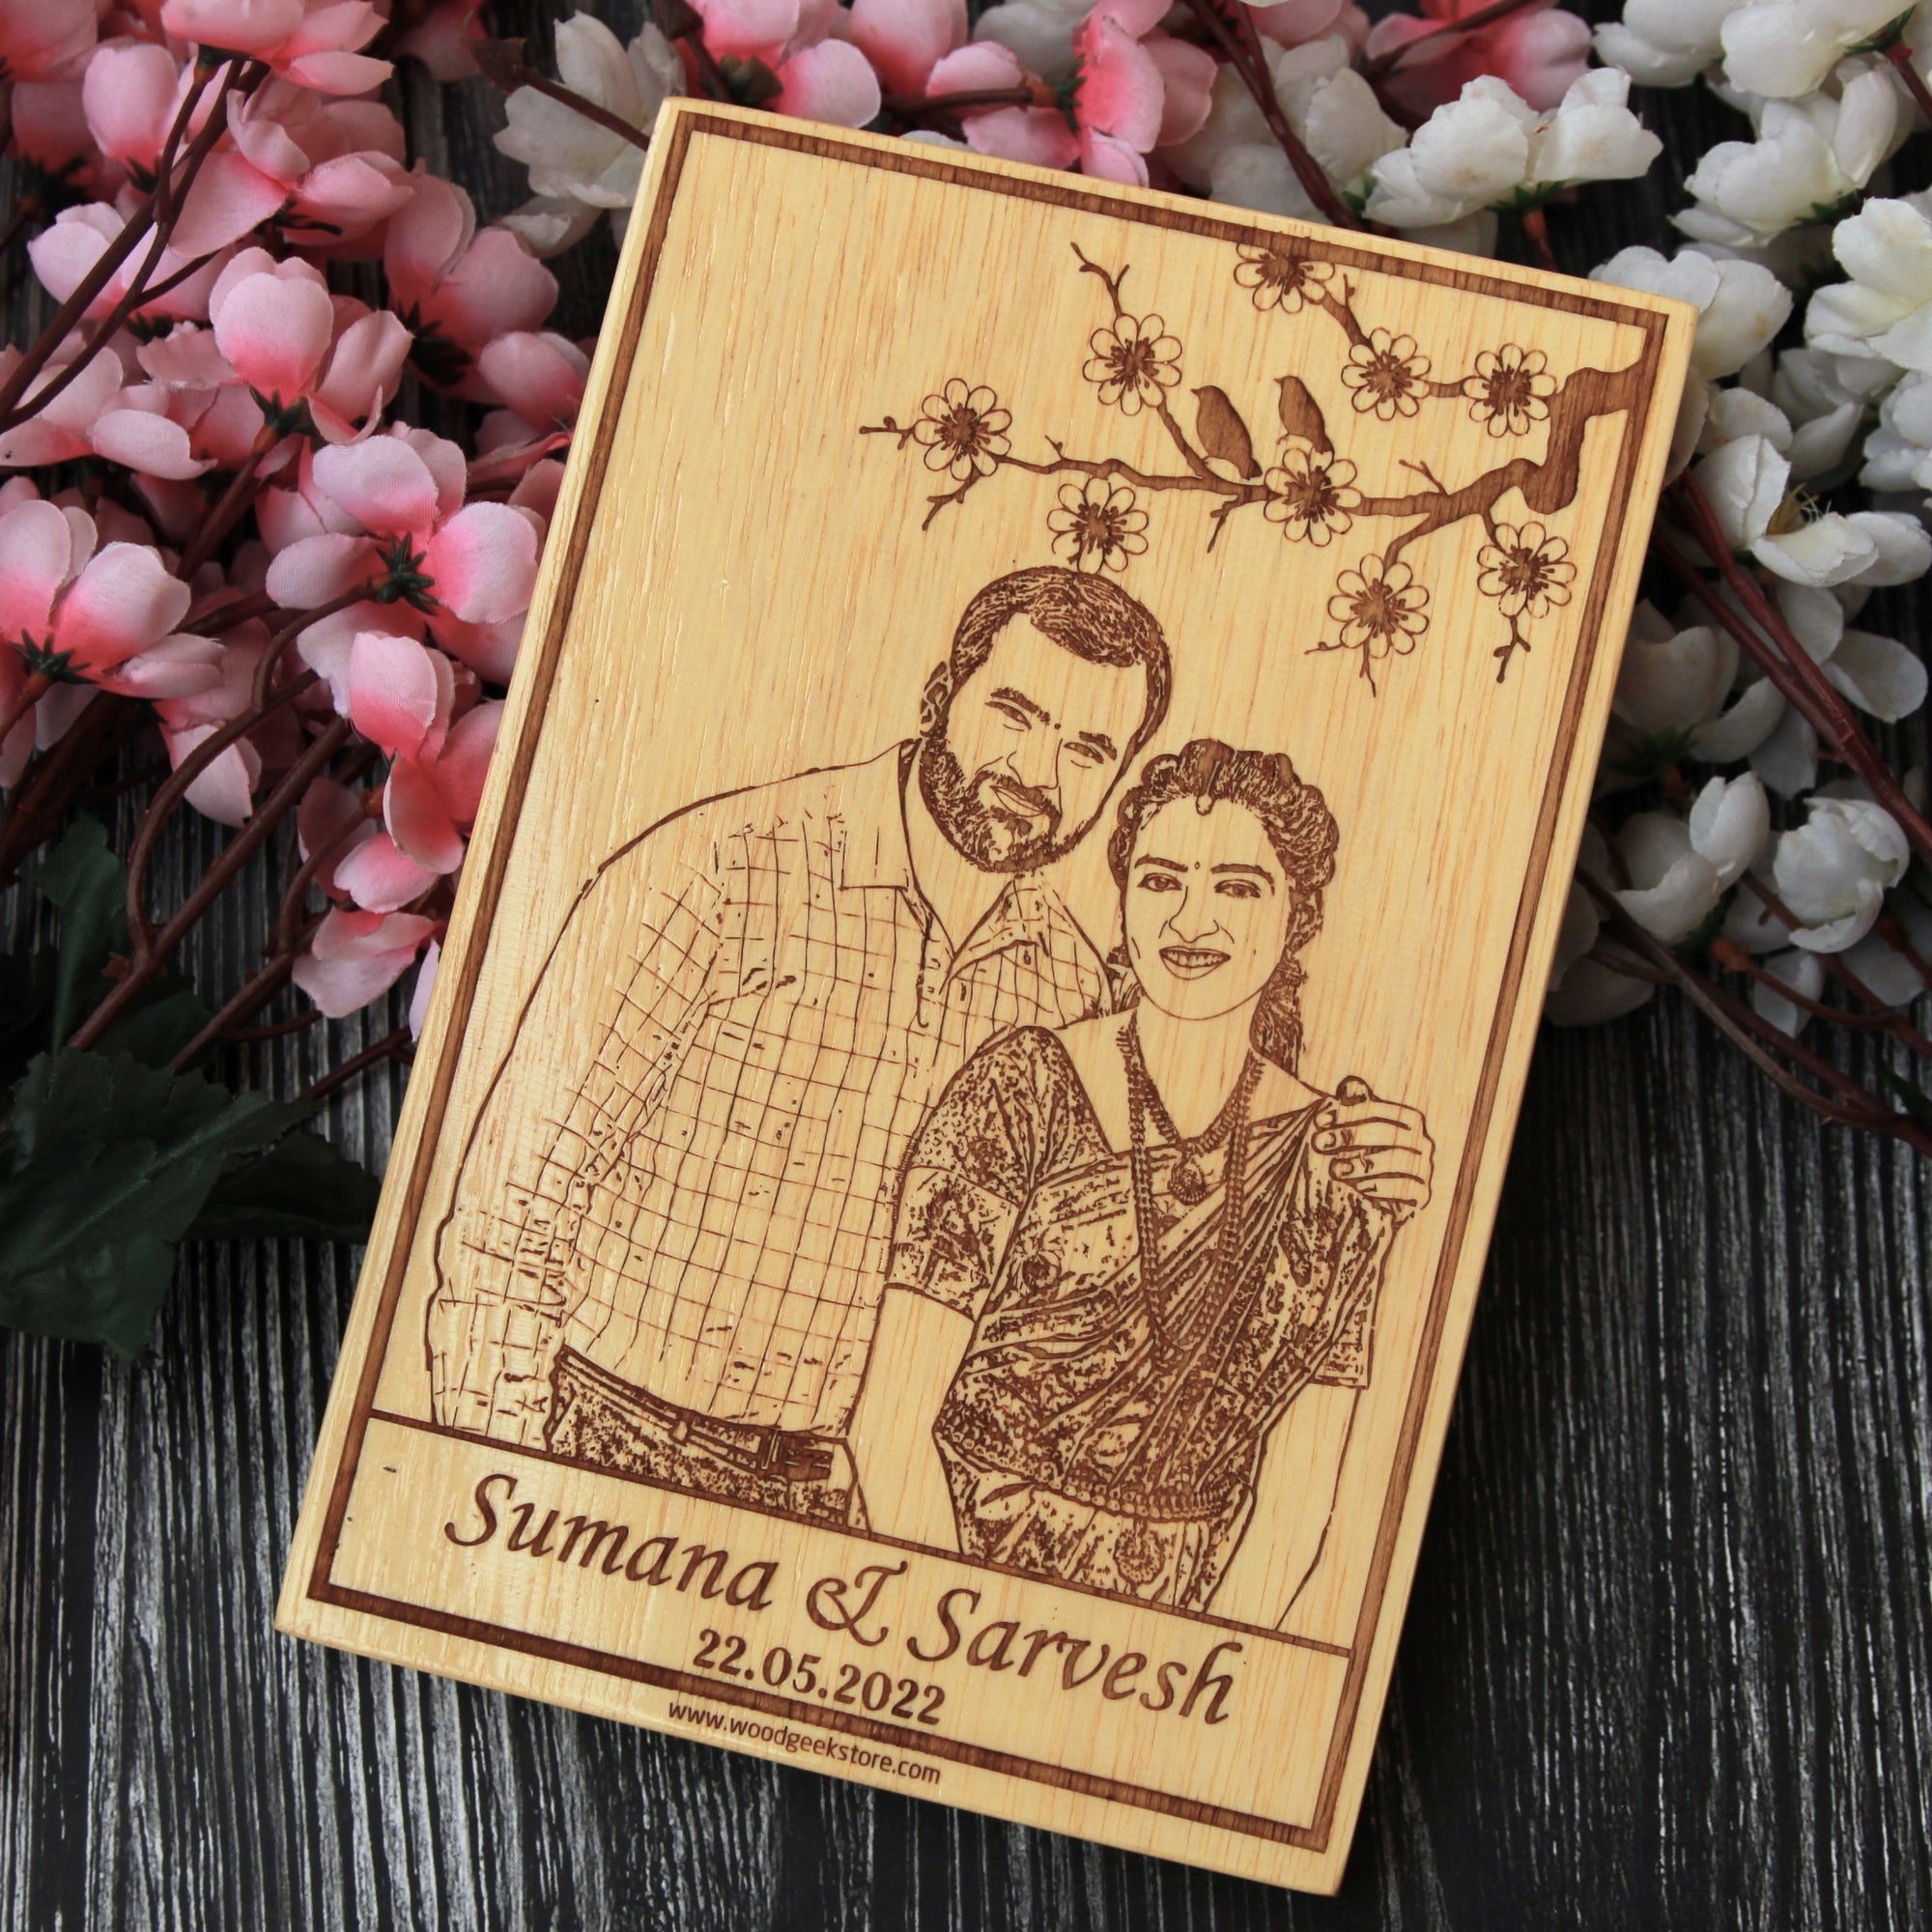 Create Your Own Carved Wooden Poster Engraved With A Photo And Quote - Woodgeek Store